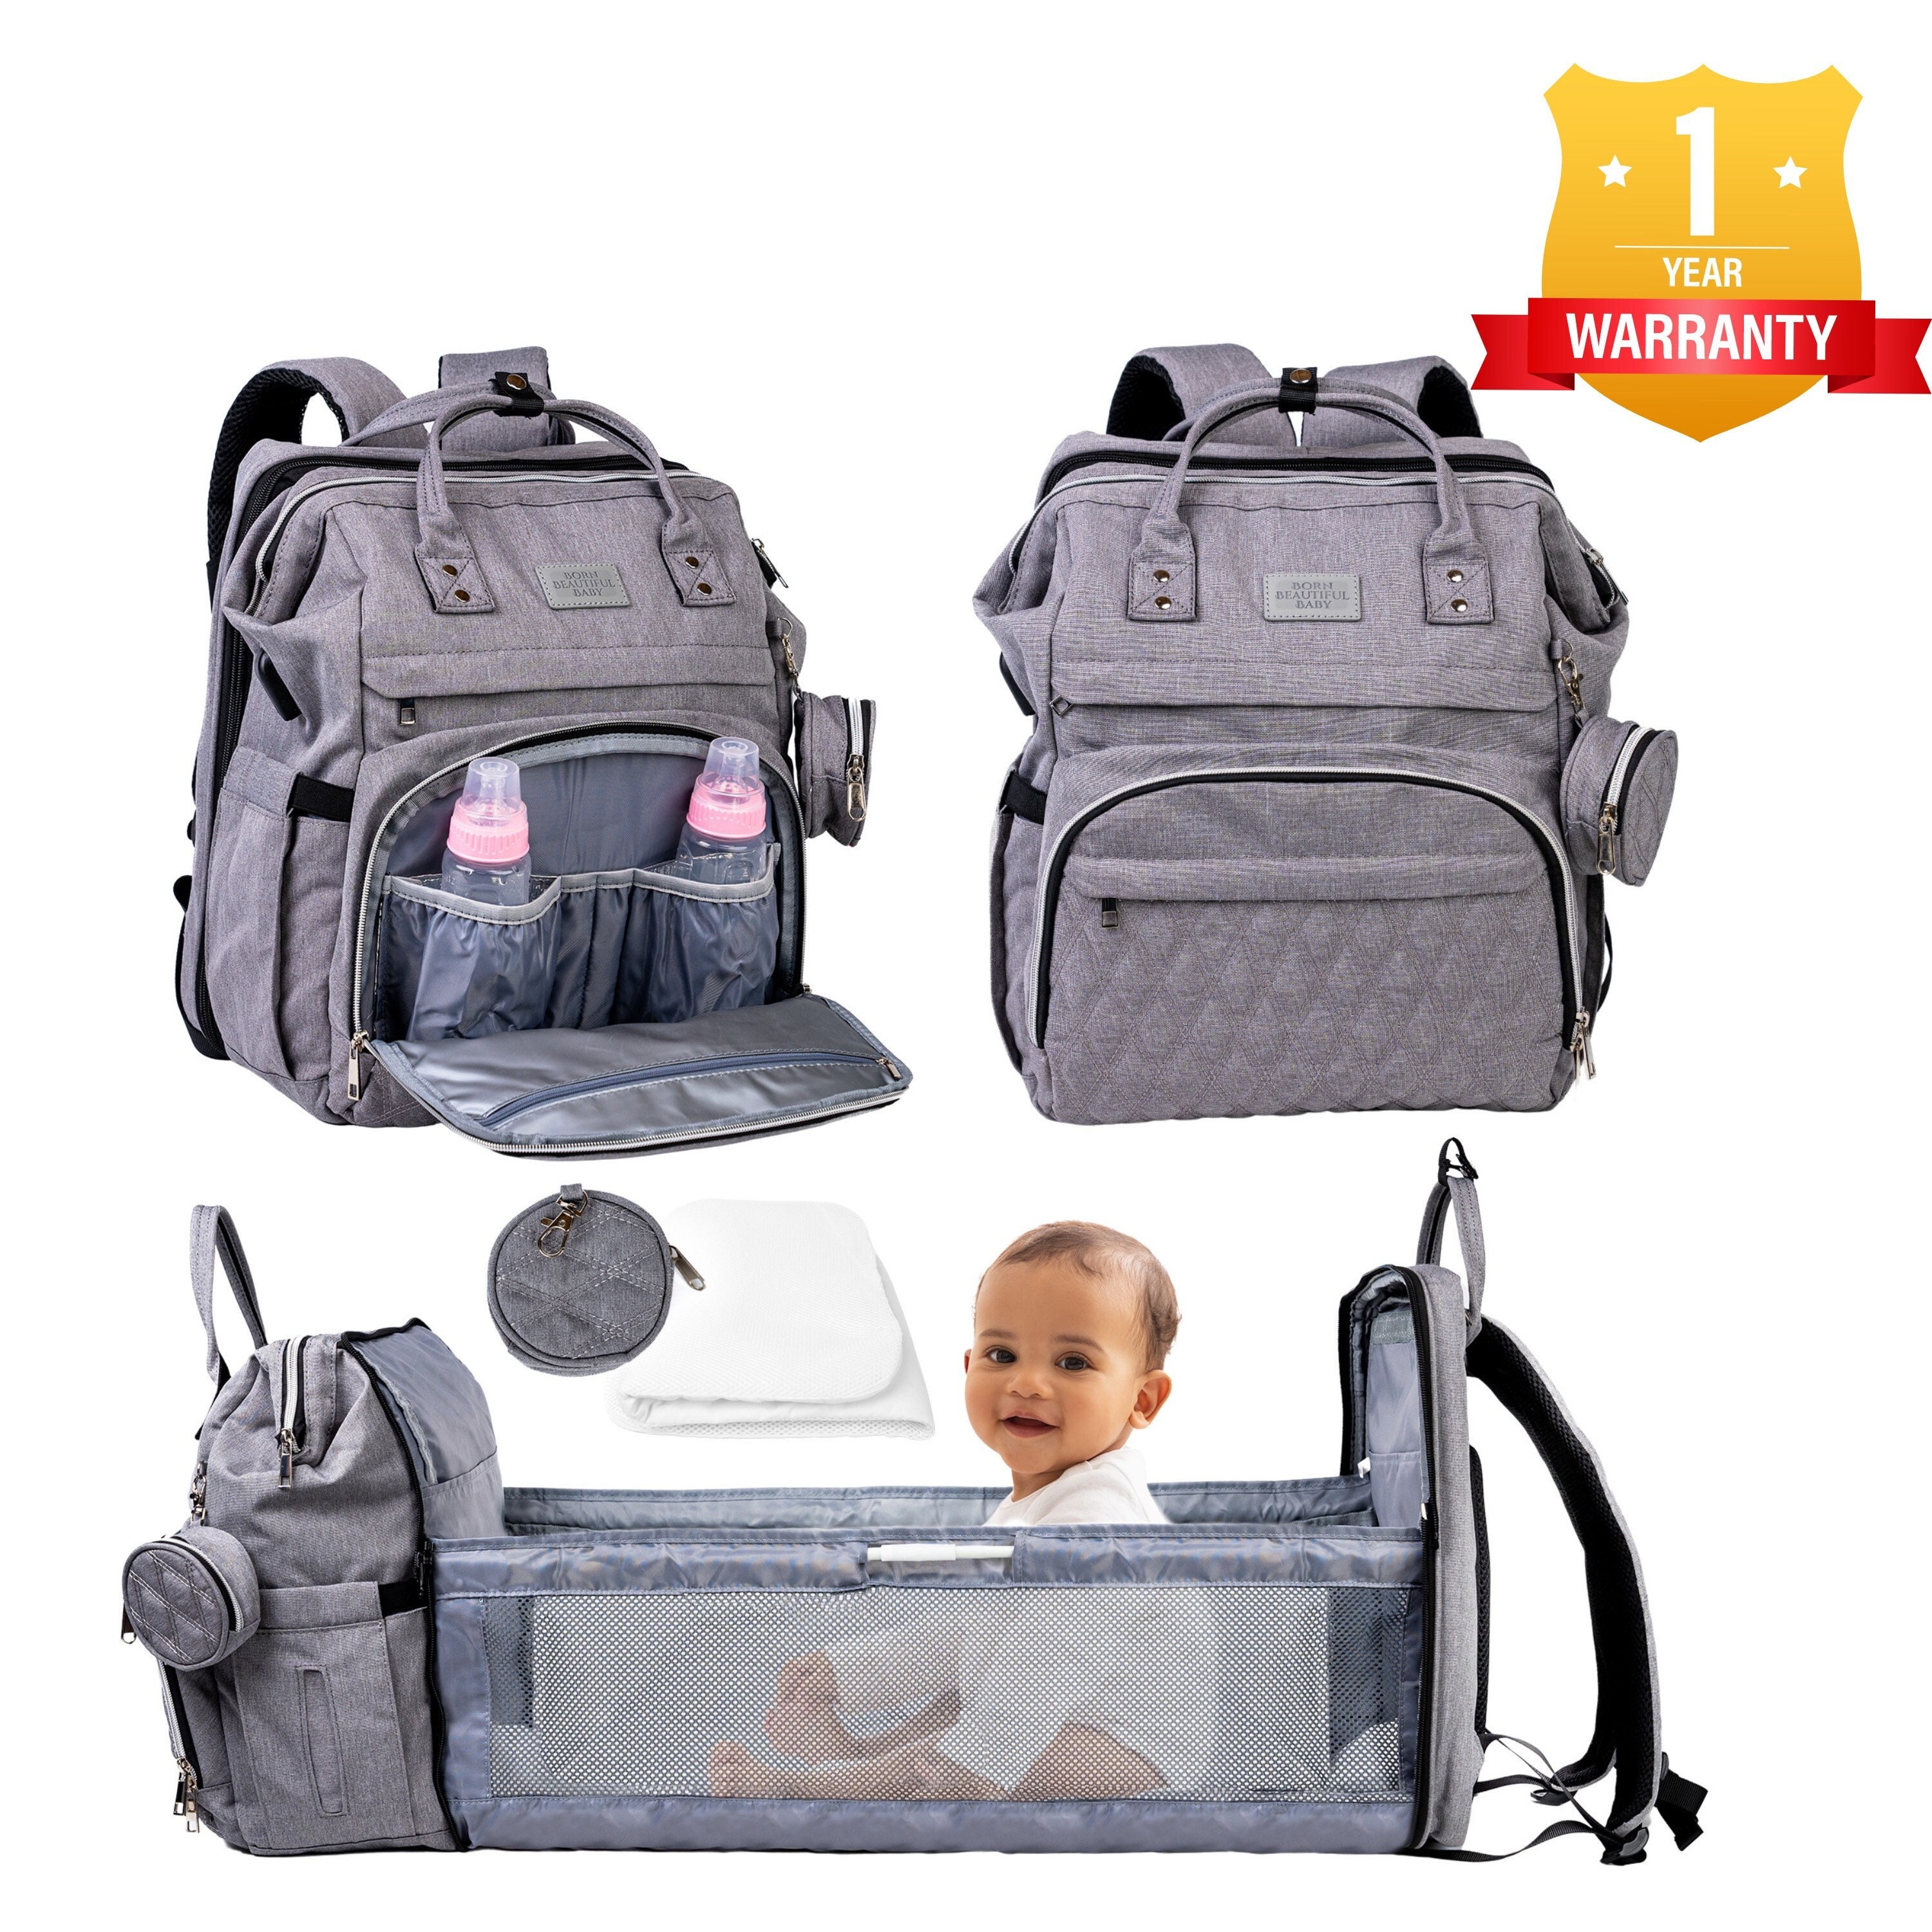 3 In 1 Diaper Bag Backpack With Changing Station, Diaper Bags For Baby  Girls Boys, Baby Shower Gifts, Newborn Essentials Must Haves, Multi-functio